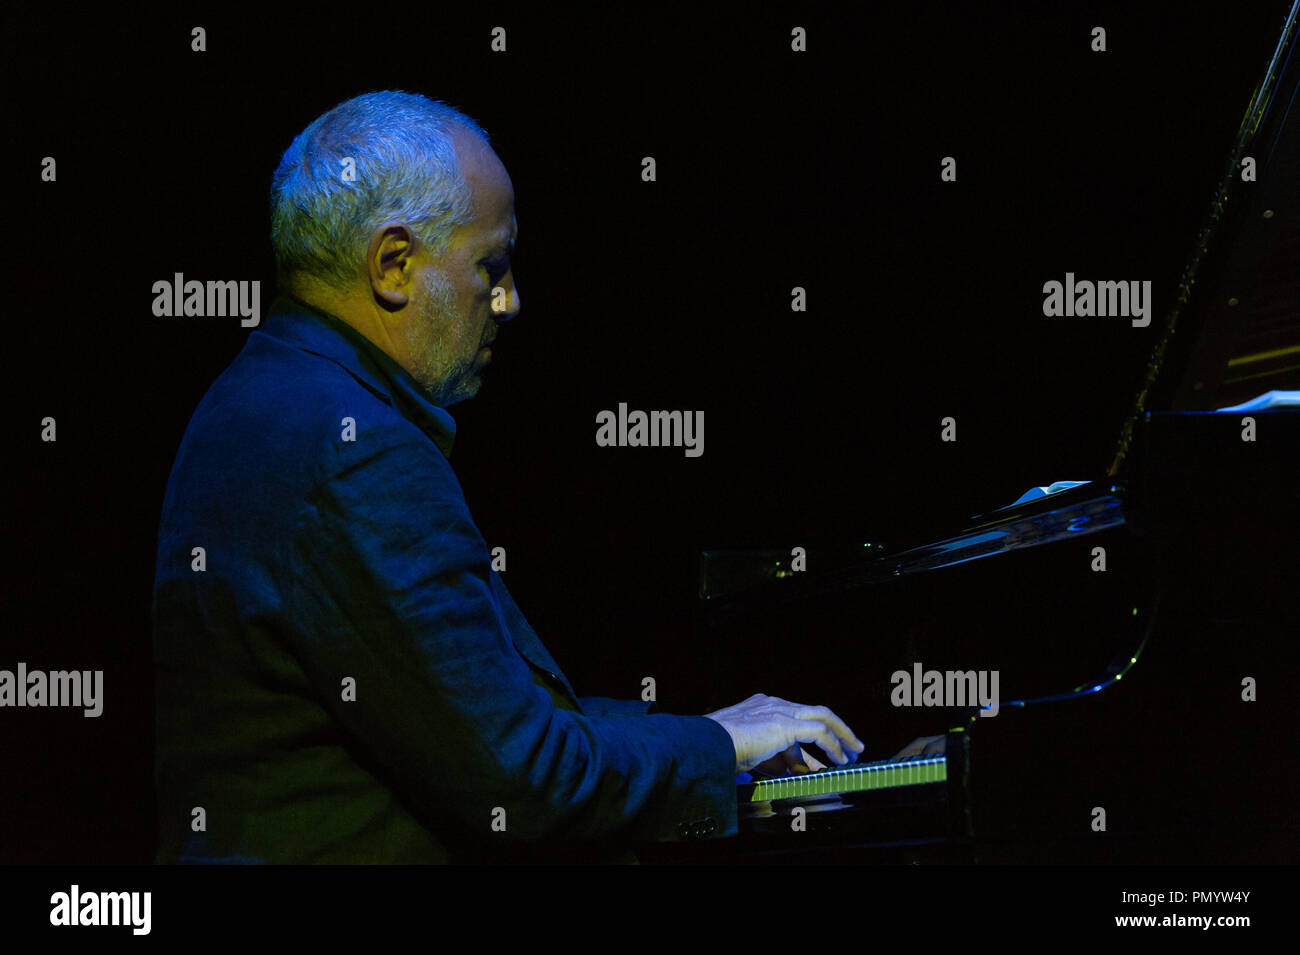 Danilo Rea at the piano and Urbano Barberini, narrator, presented on 18/9/2018 at the Auditorium Parco della Musica in Rome at the Franco-Italian Festival of jazz and improvised music 'Una striscia di Terra Feconda', the pièce by Nello Trocchia (journalist and writer threatened by the Camorra for his own writings), 'The ruins of Hadrian'. Voice narrator Urbano Barberini, who interacted with the improvisations of the pianist Danilo Rea. The pièce tells of an important victory of civil society on business policy, which had planned to build a landfill at the Hadrian's Villa, Unesco site. Danilo R Stock Photo